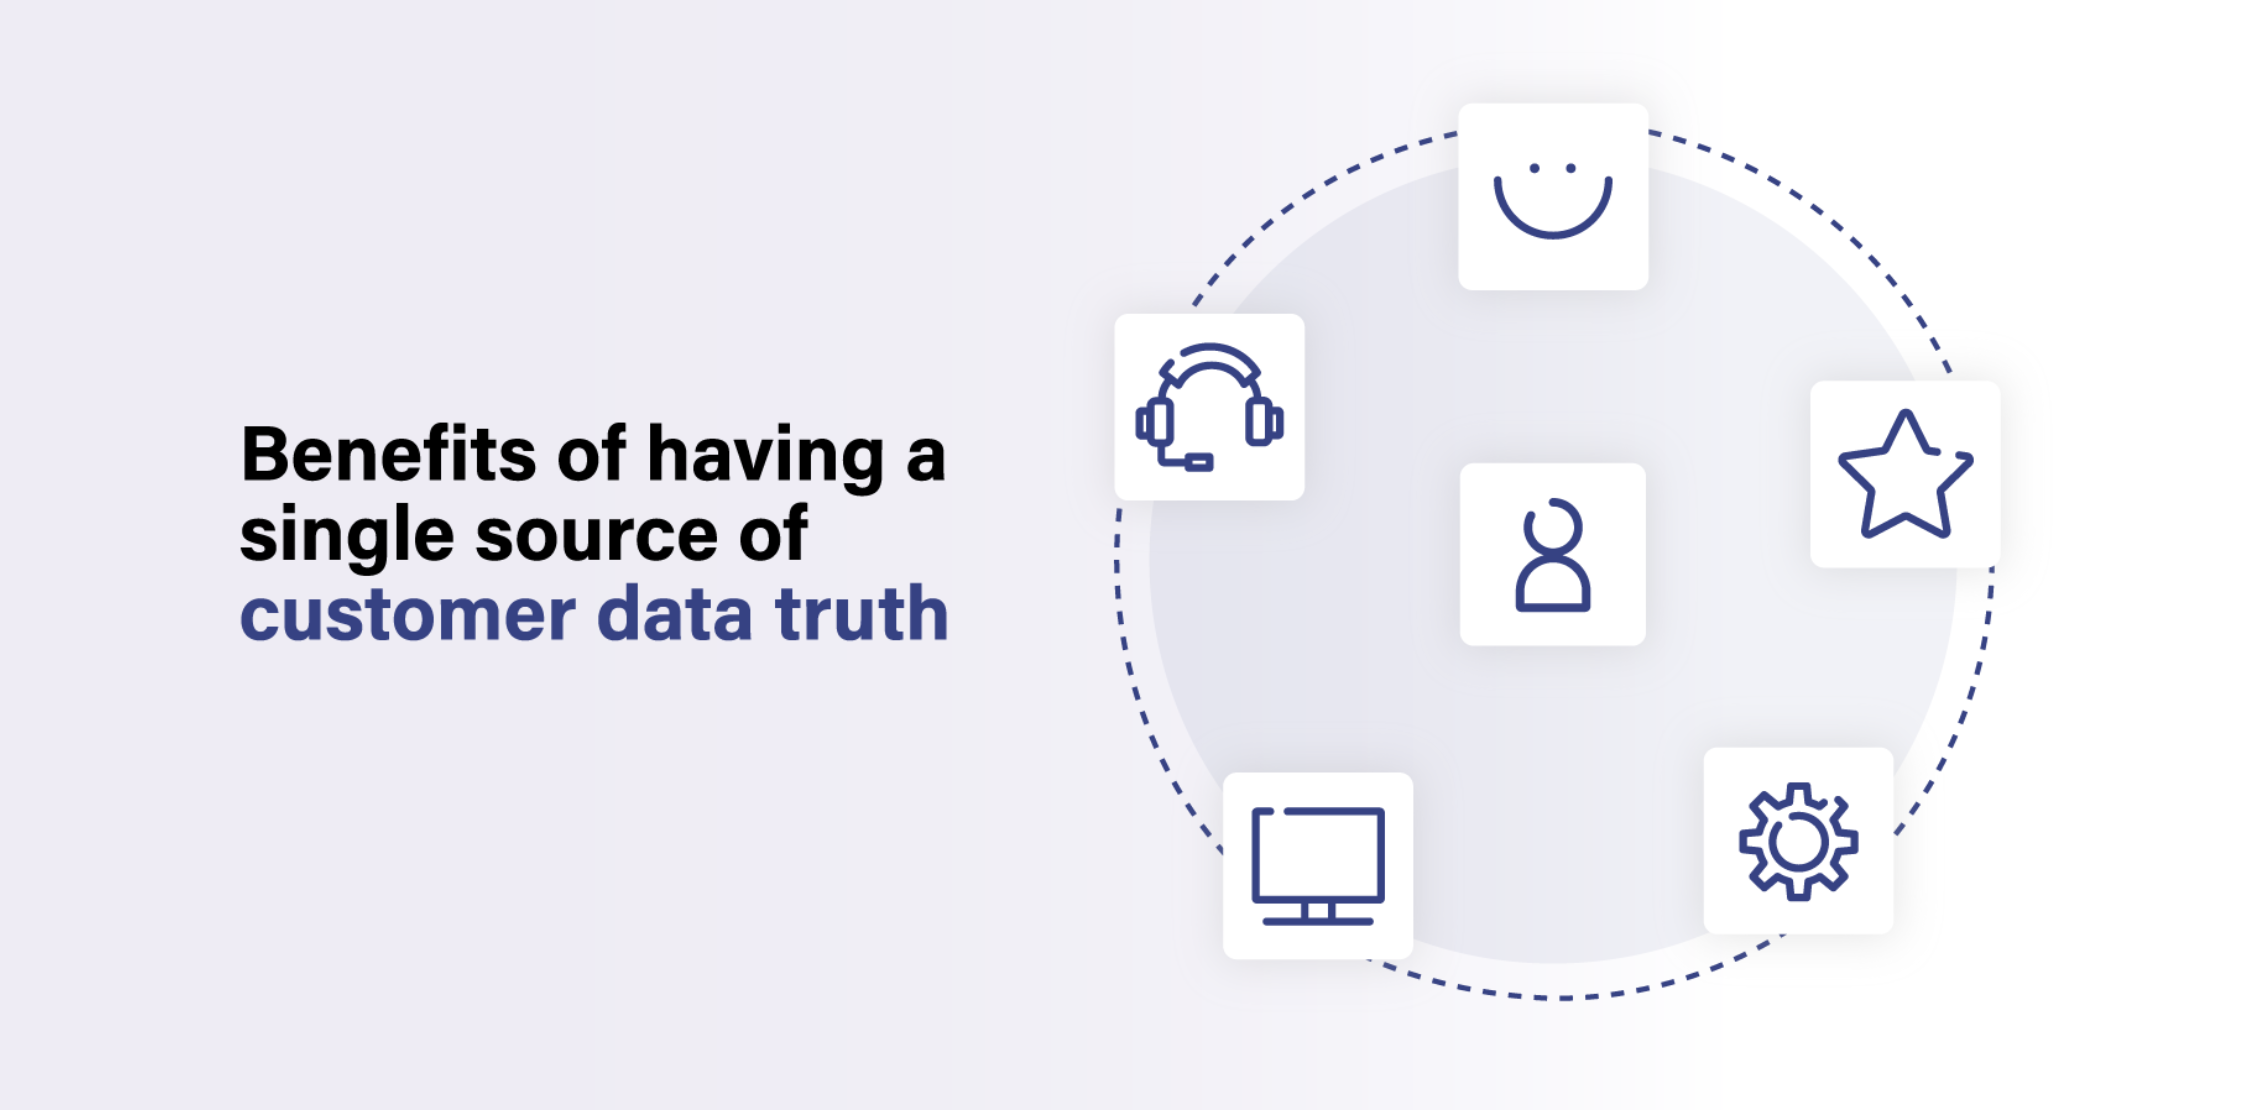 Benefits of having a single source of customer data truth